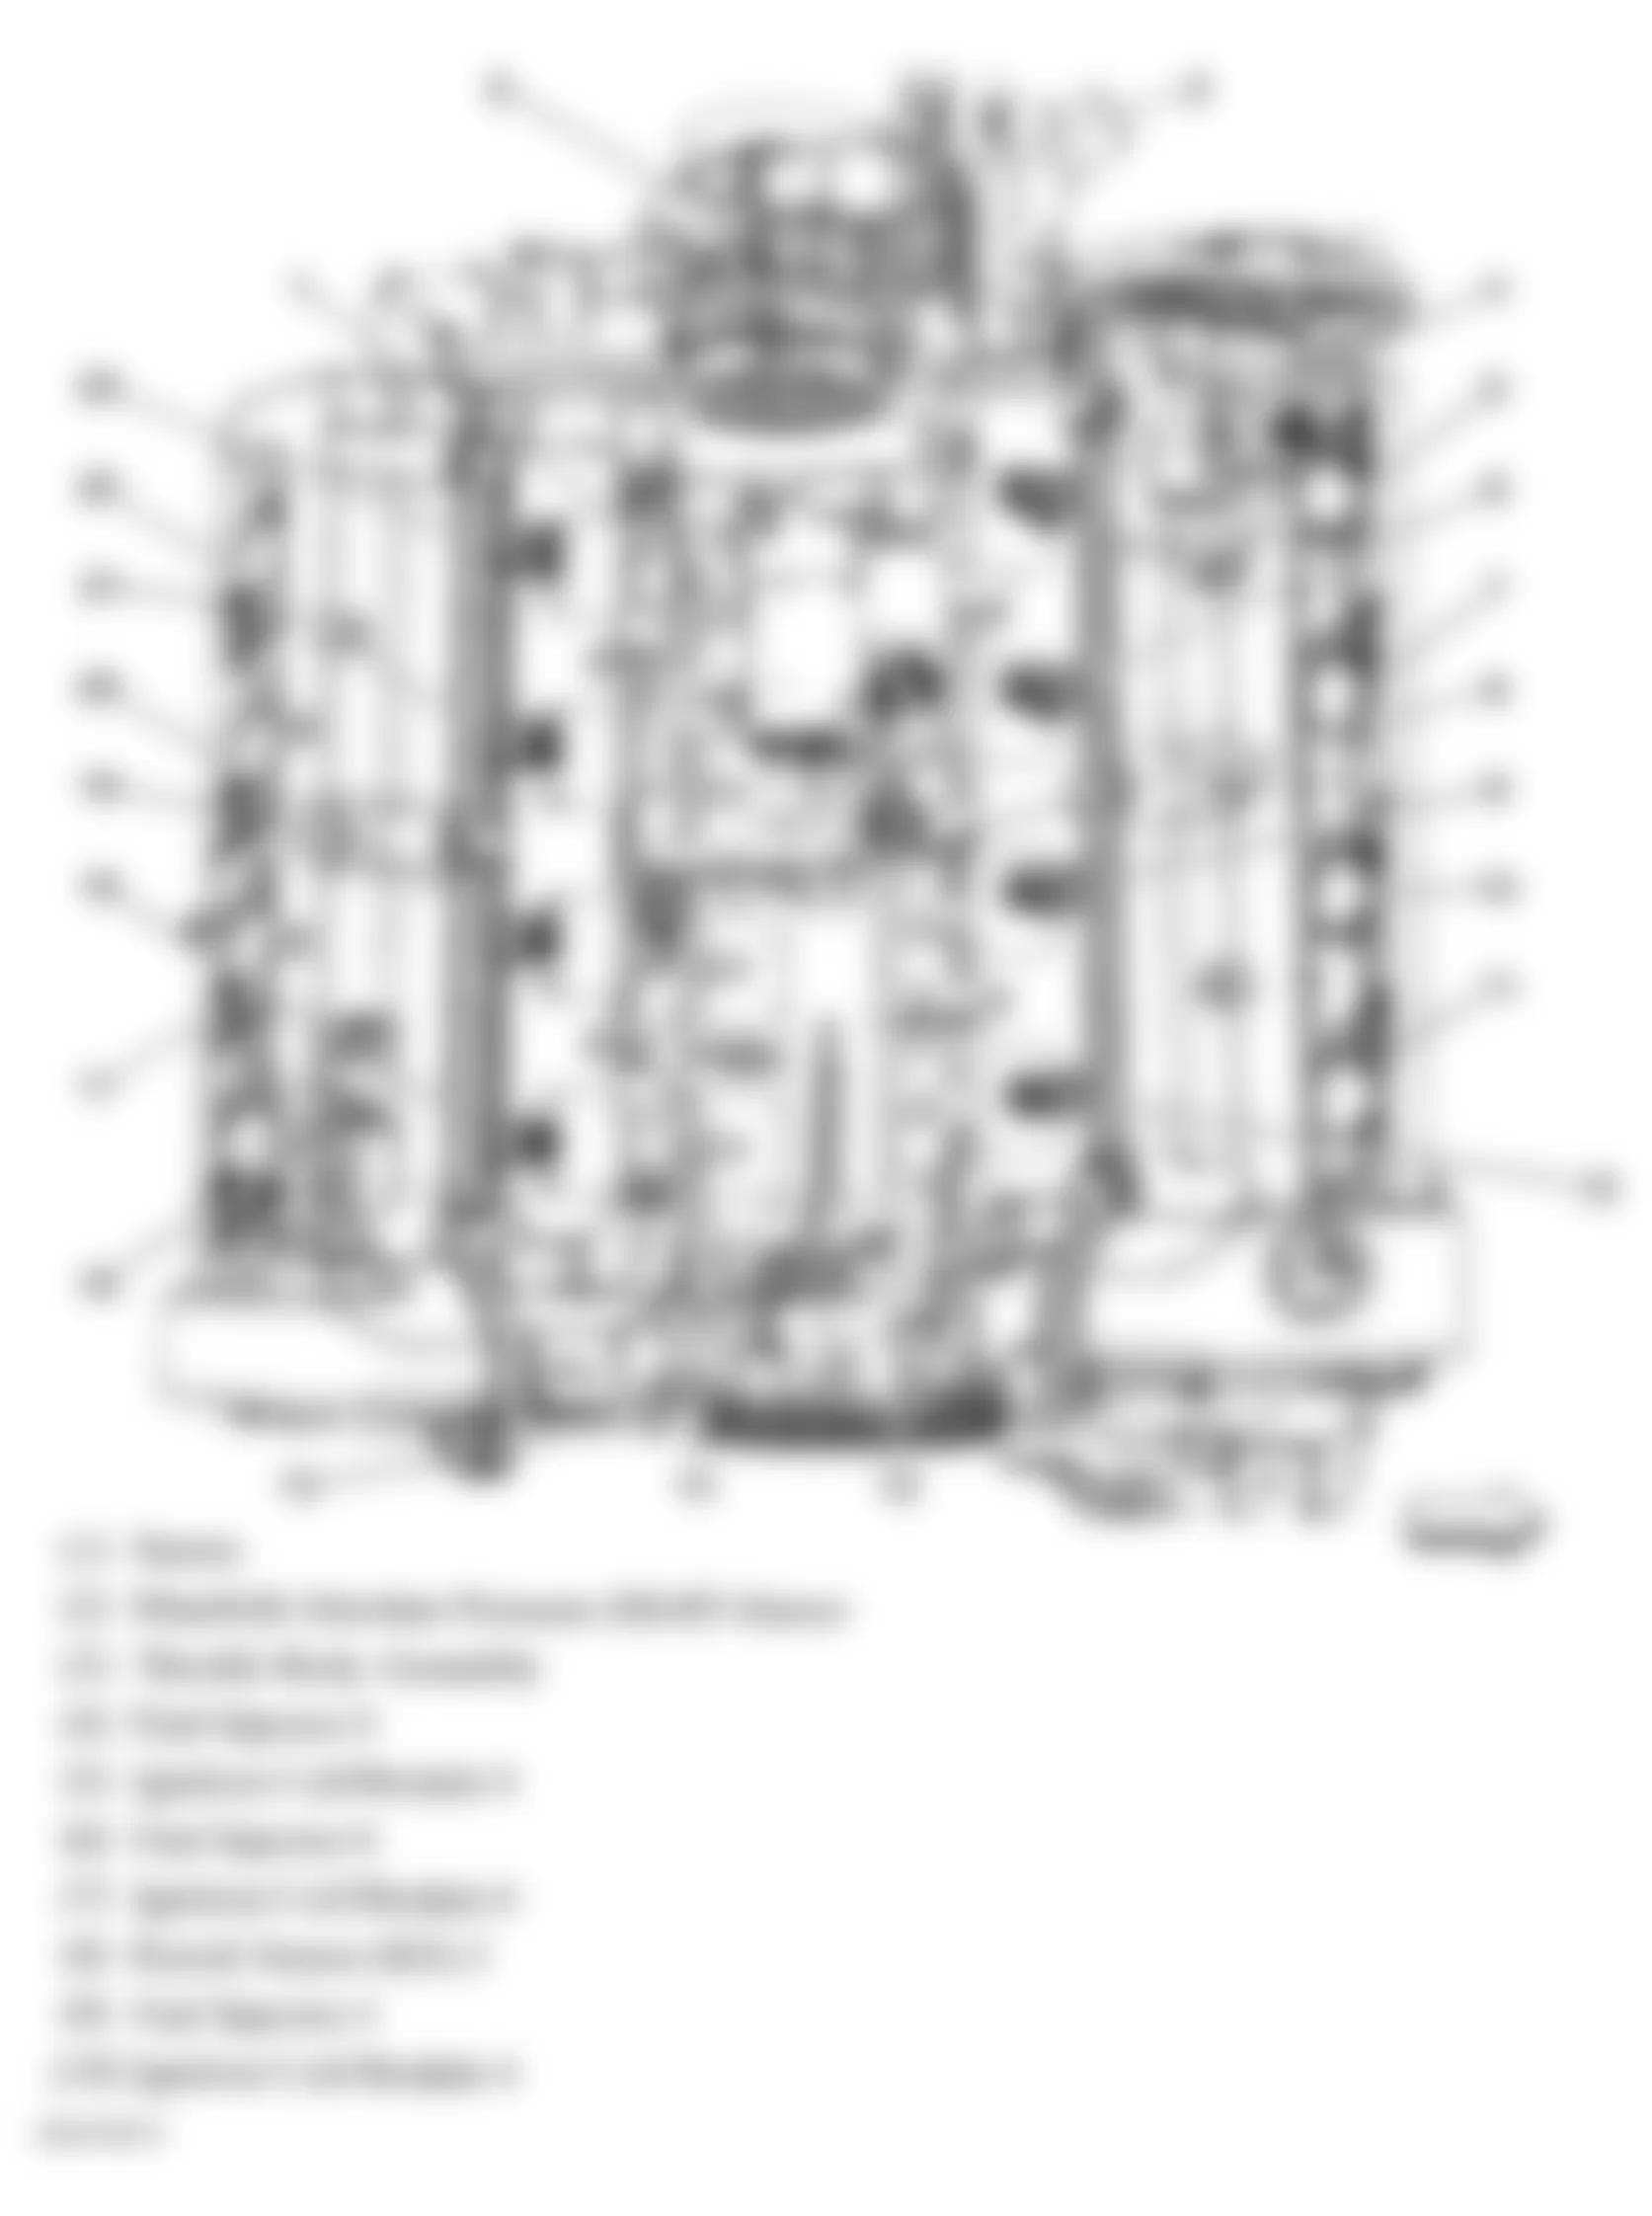 Buick Lucerne CXL 2006 - Component Locations -  Top Of Engine (4.6L) (1 Of 2)